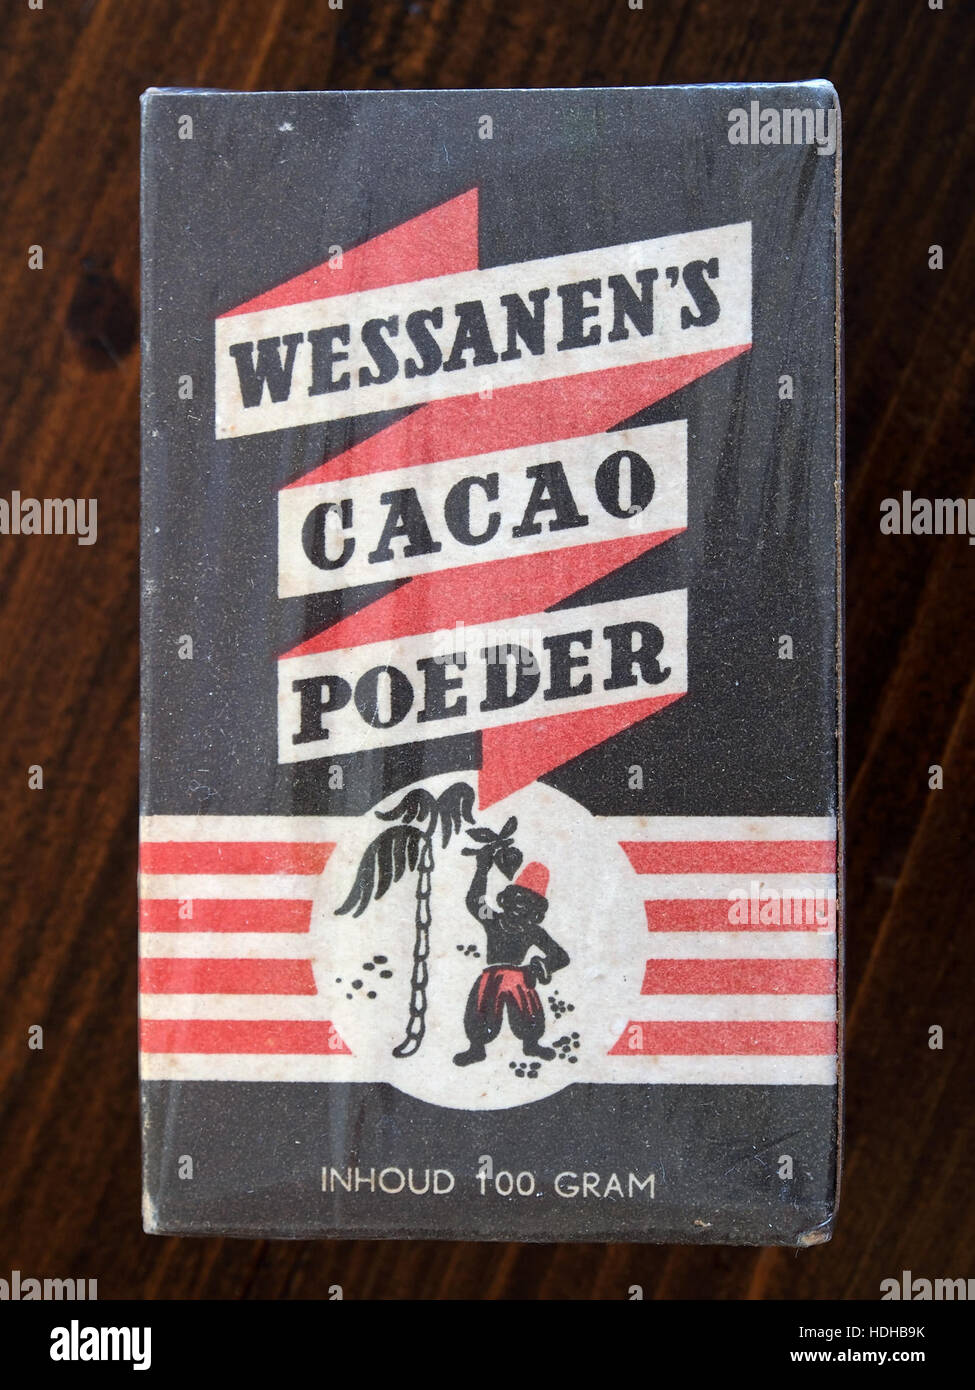 Wessanens Cacao Poeder 100 gr pic1 Stock Photo